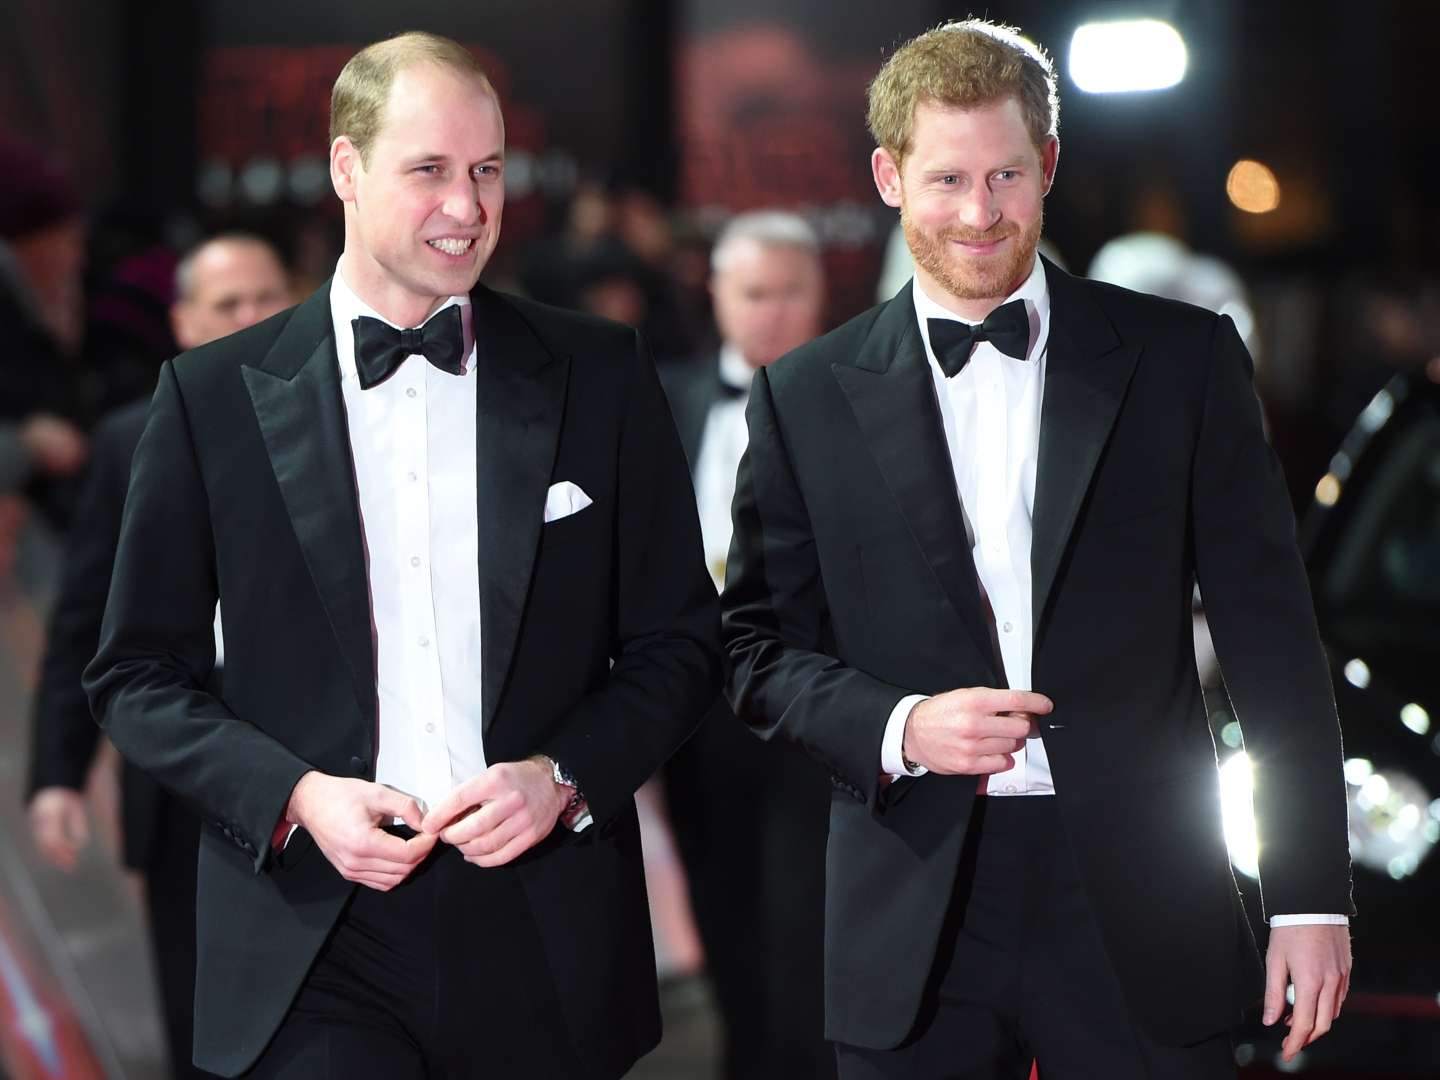 The Duke of Cambridge Prince William with His Brother the Duke of Sussex Prince Harry